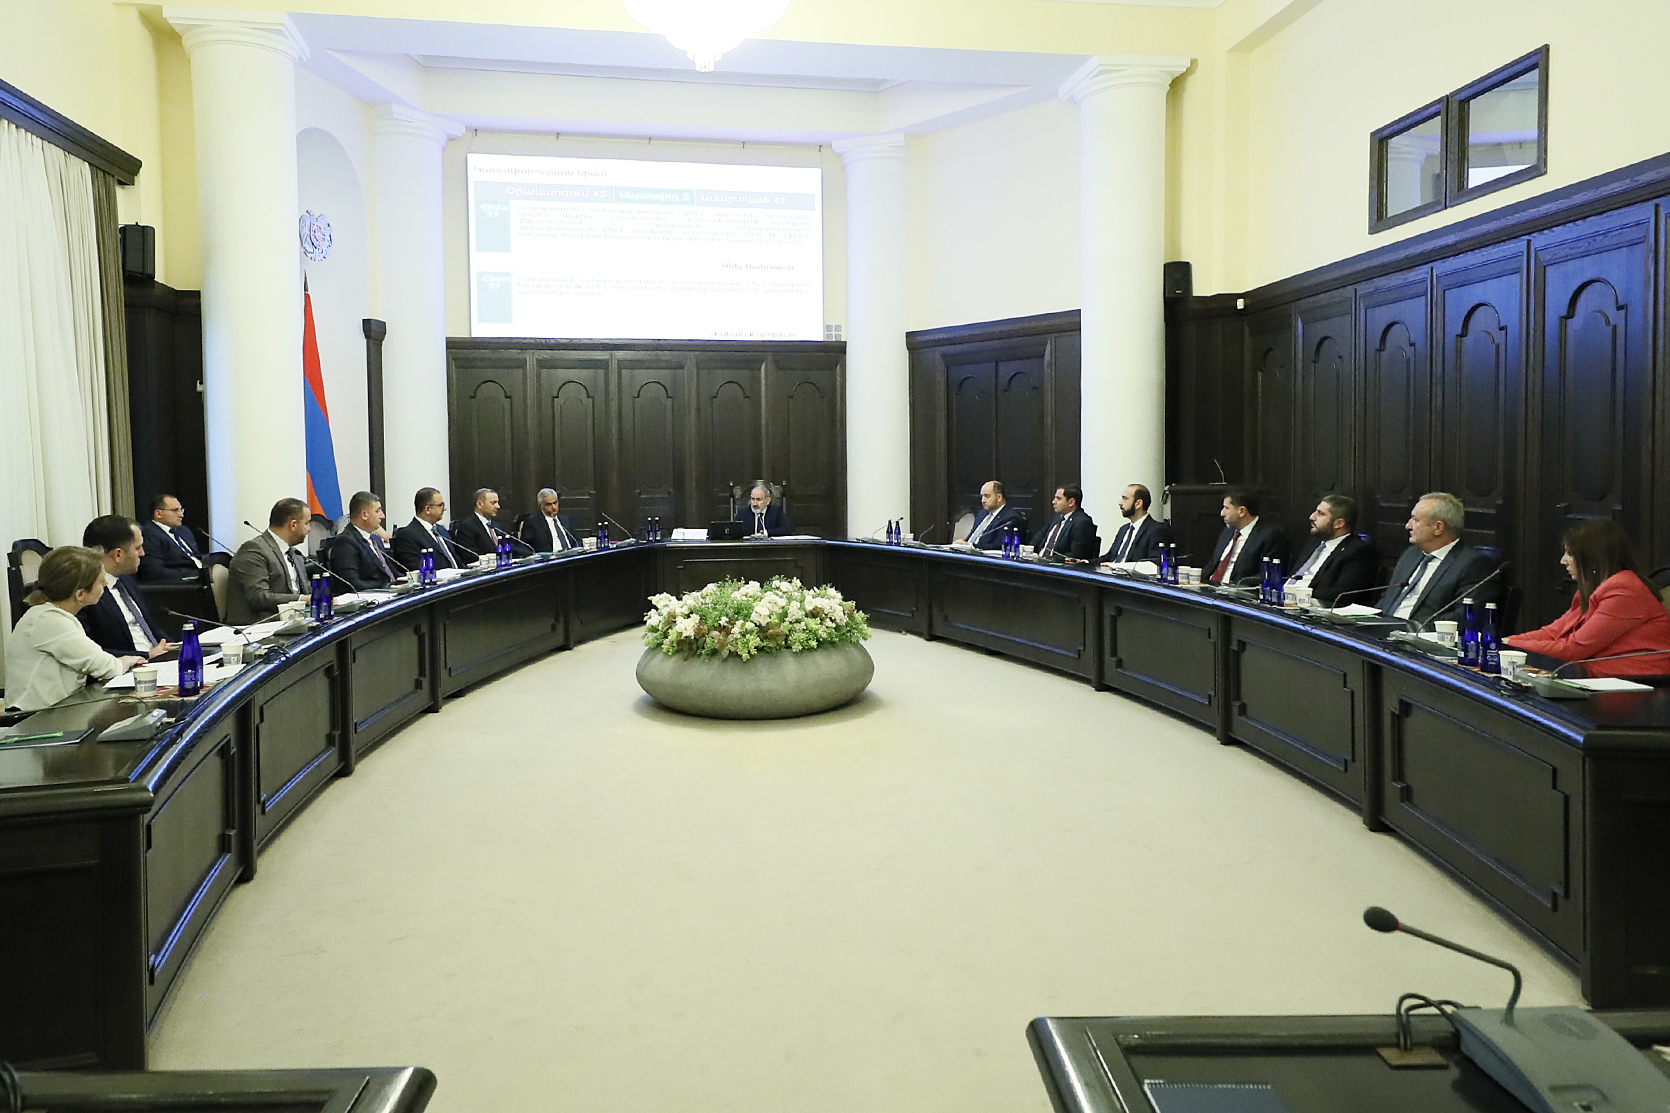 2 billion 734 million AMD for the repair of Stepanavan-Yaghdan, Sisian-Dastakert and Tatev-Aghvani roads. the Prime Minister instructed to keep the process in the center of attention